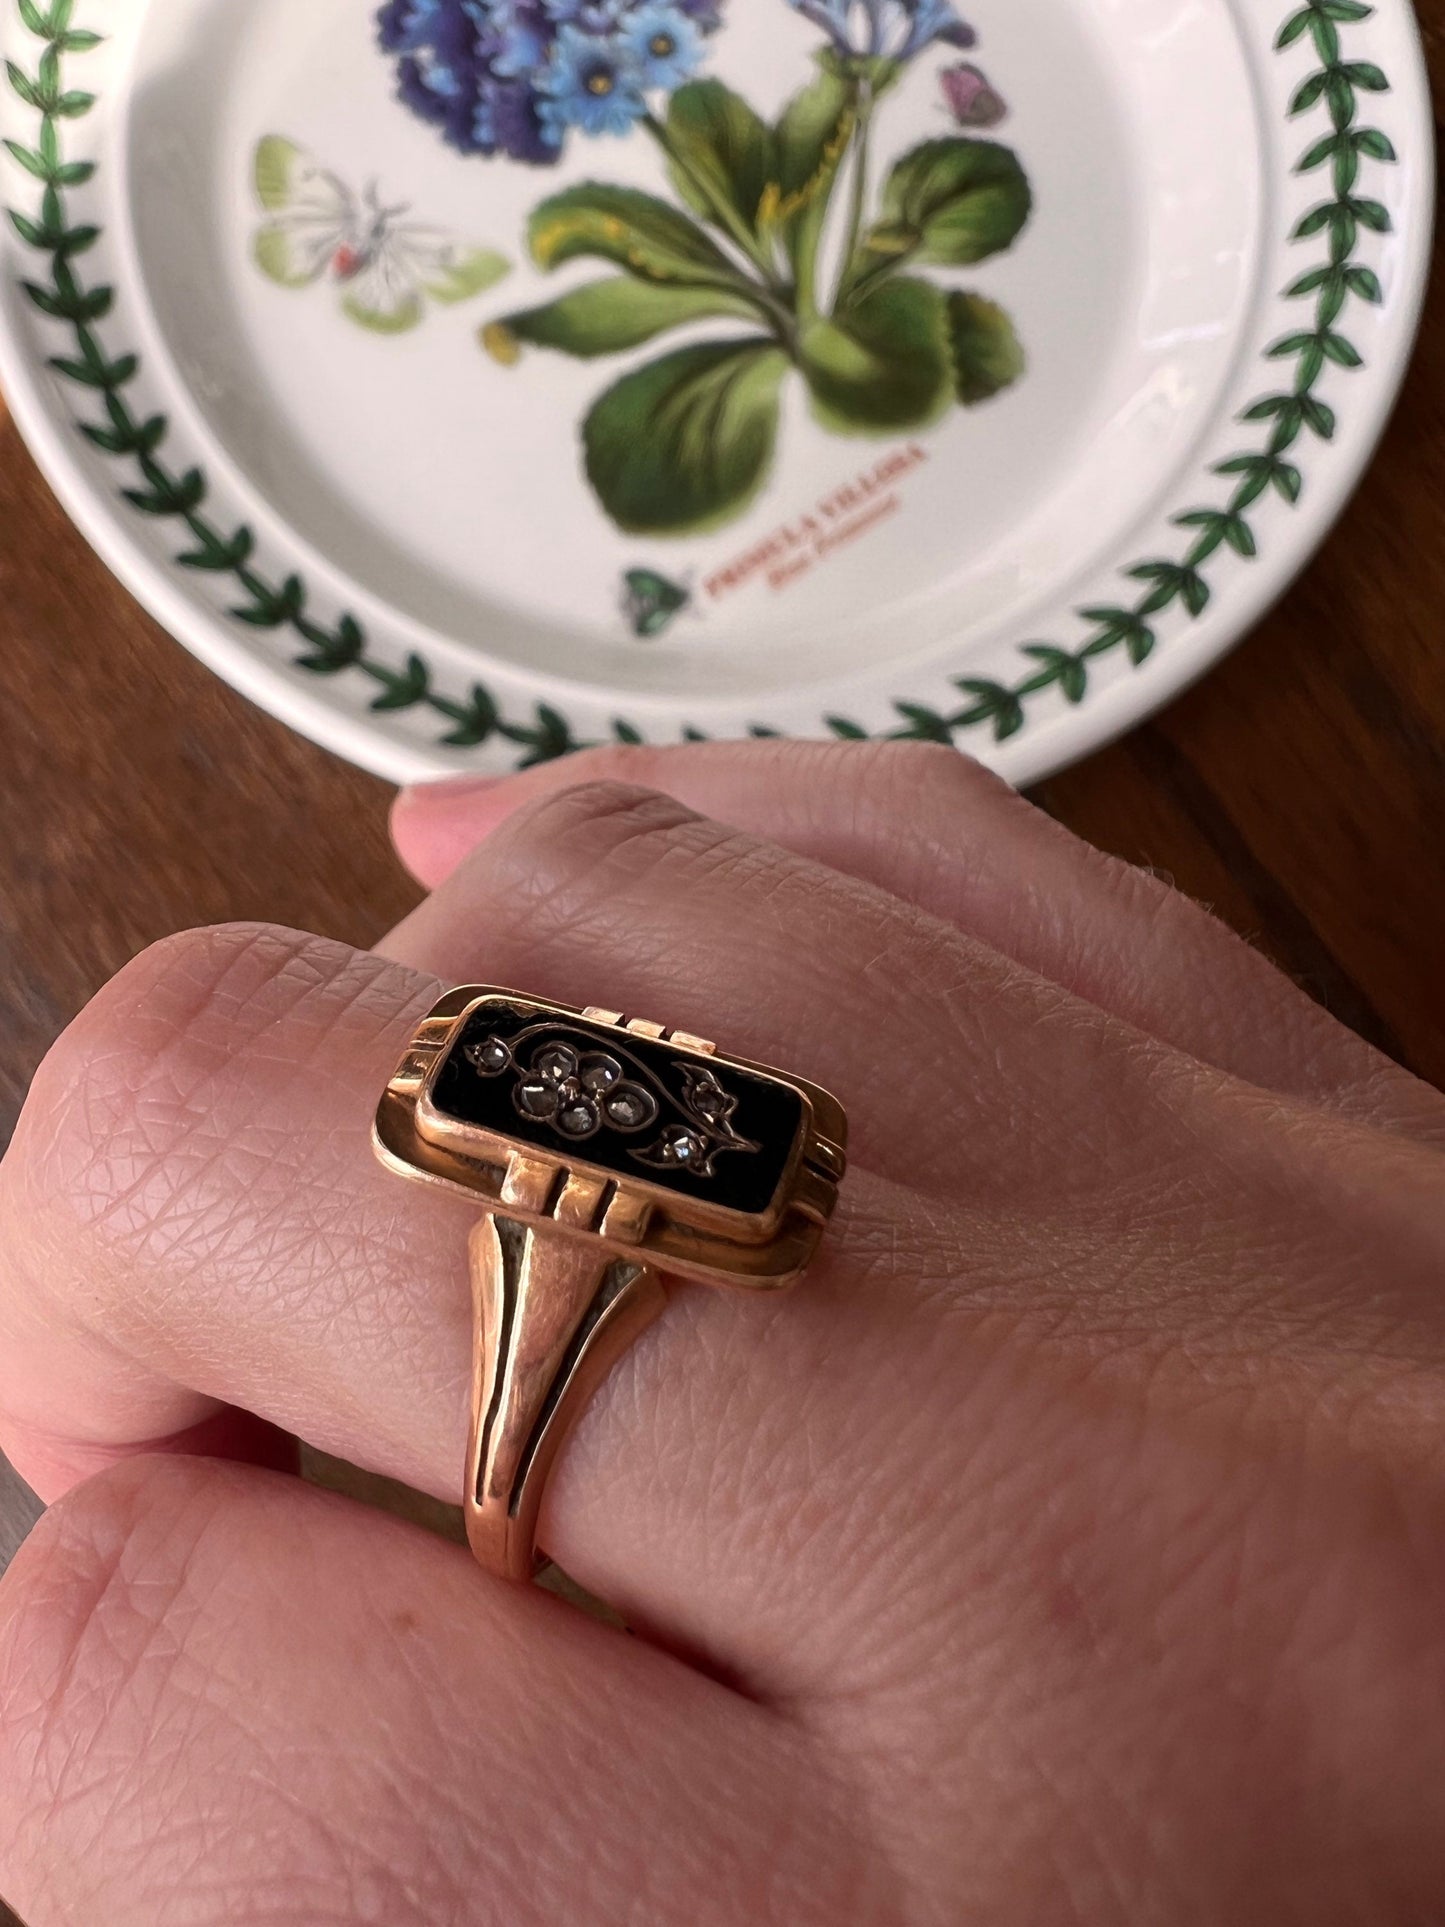 PANSY French Antique Black Enamel Rose Cut DIAMOND Floral 18k Gold Ring MOURNiNG Early Victorian Closed Back Belle Epoque Romantic Gift